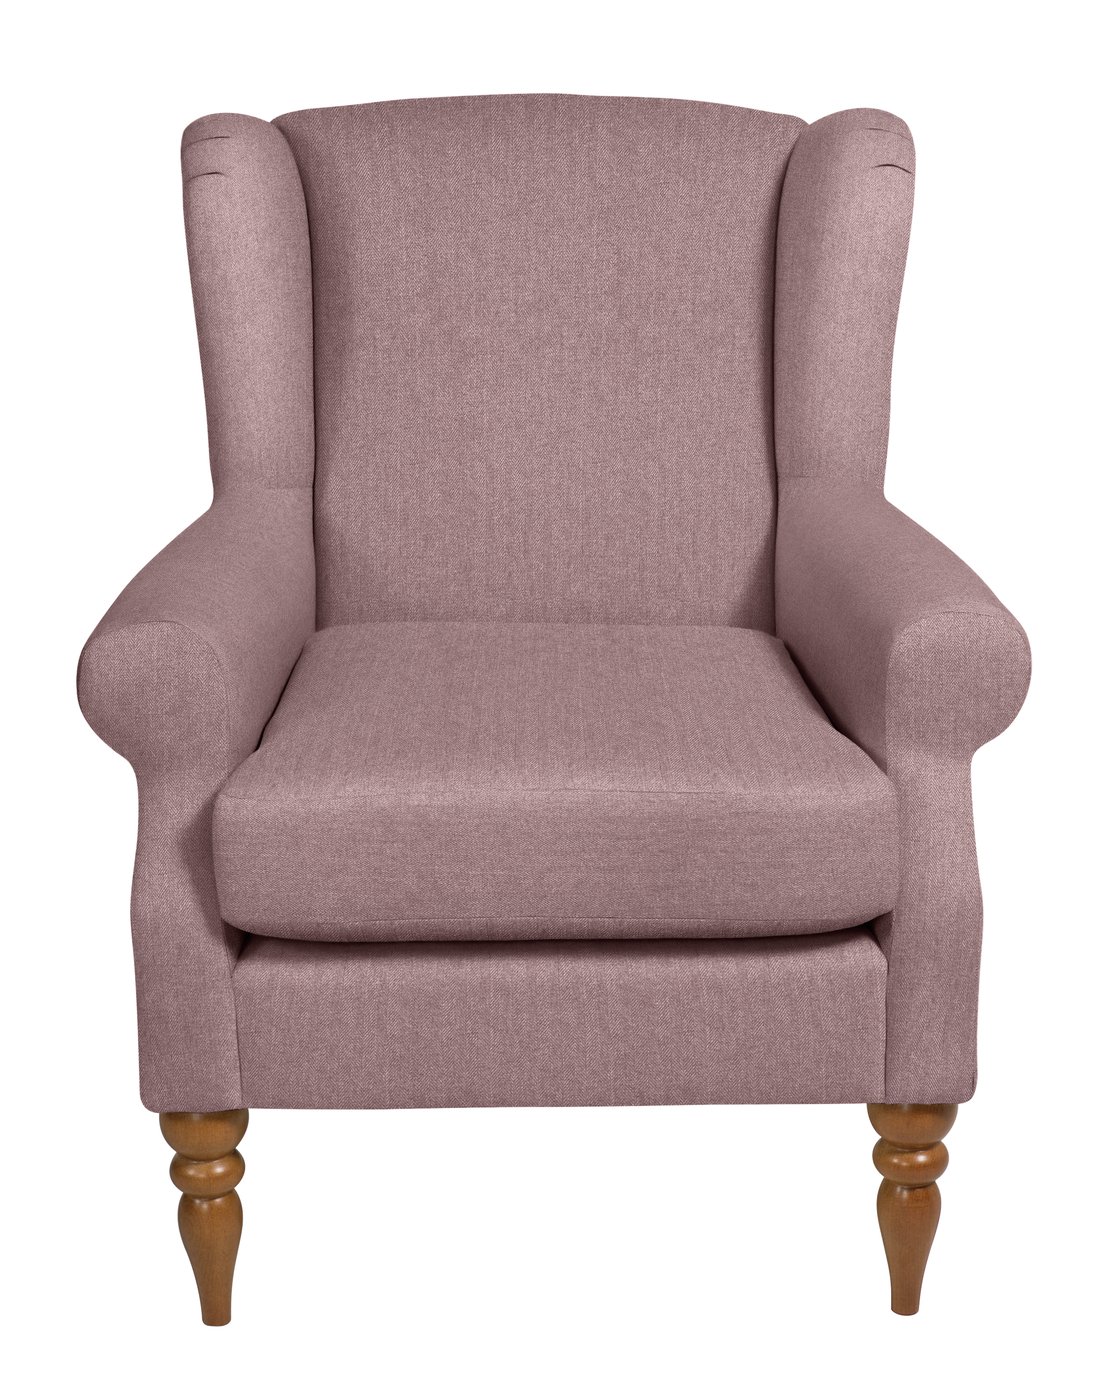 Argos Home Bude Fabric Wingback Chair - Pink